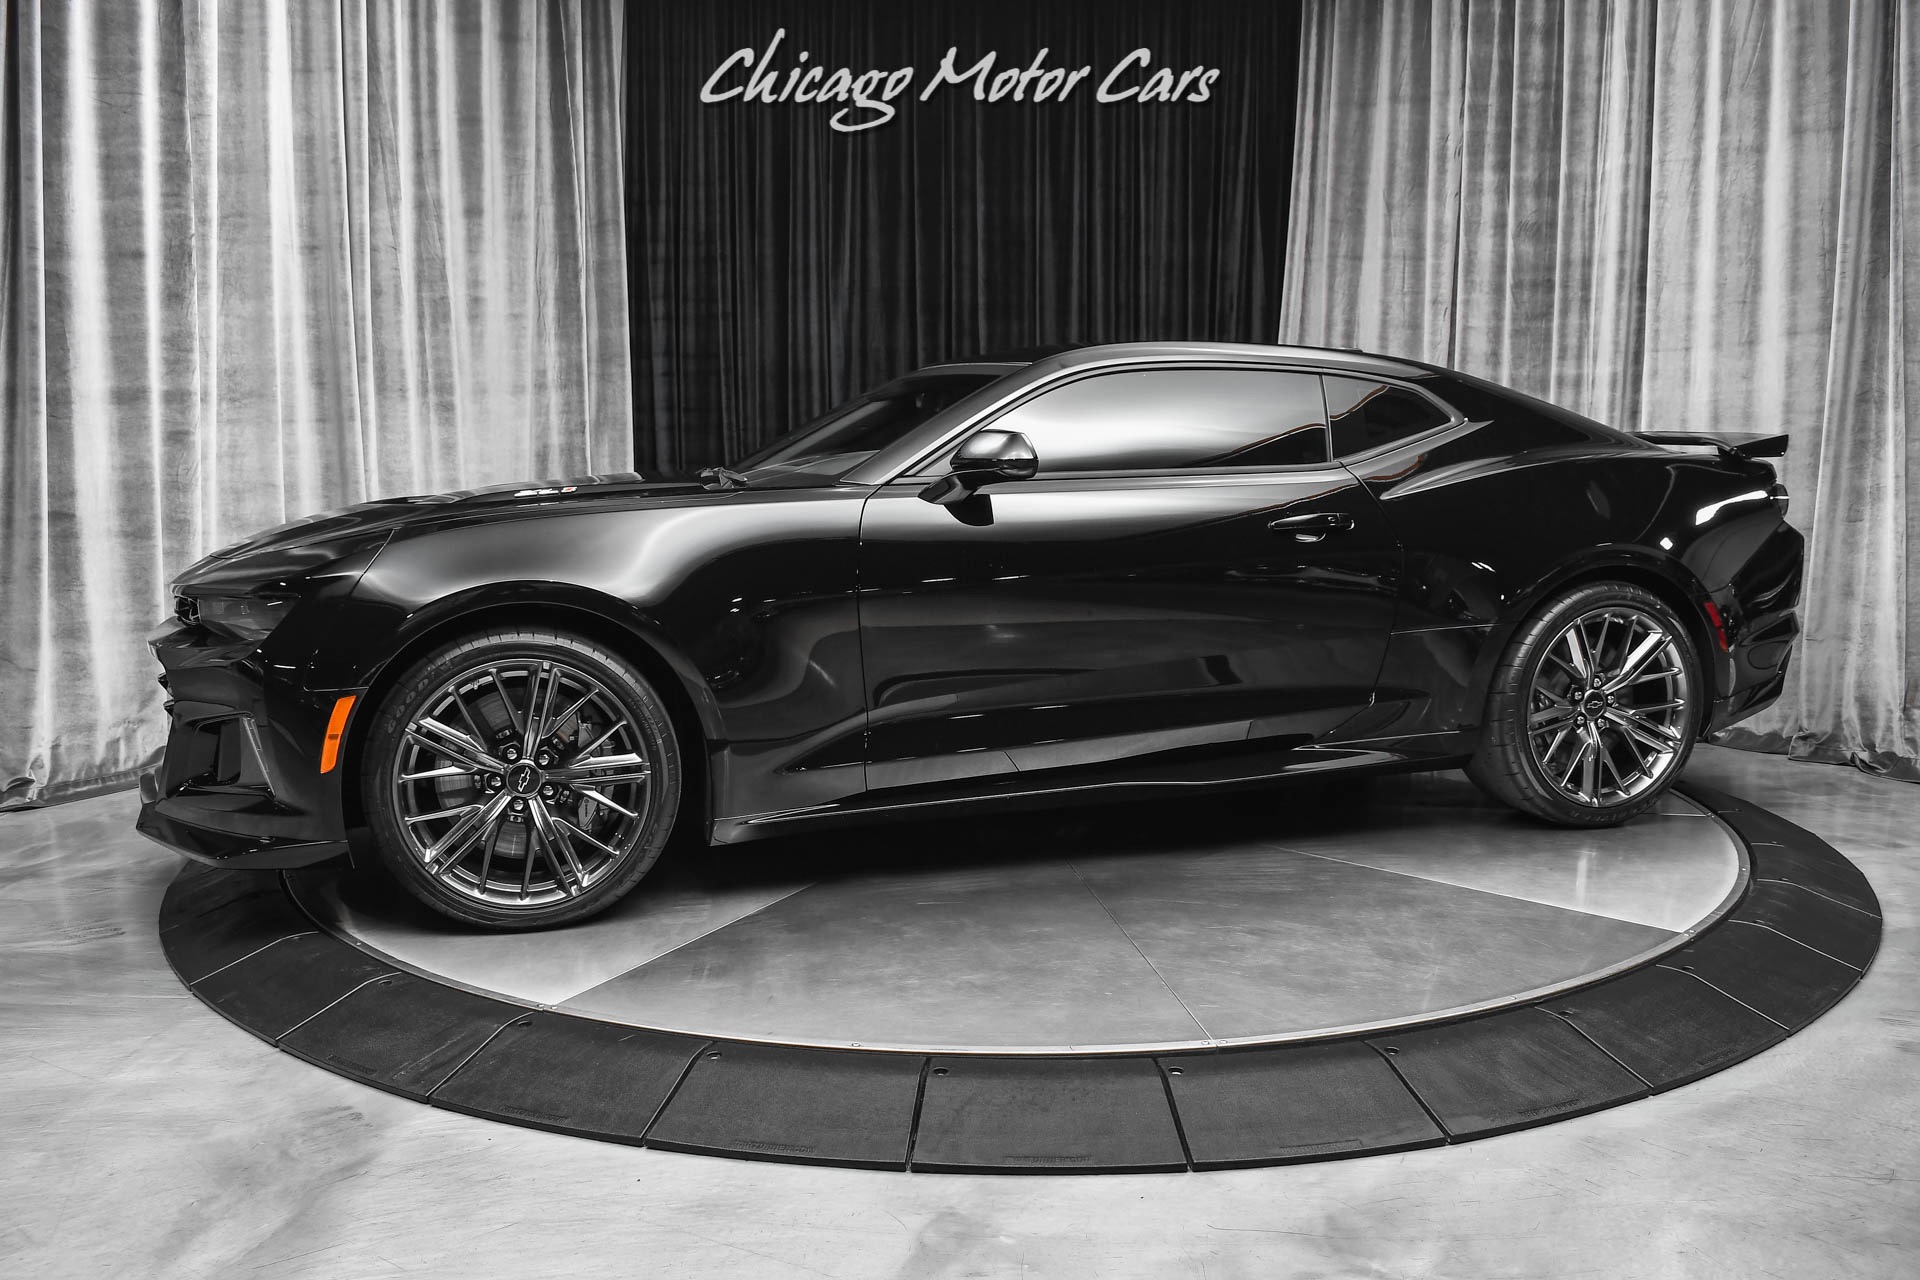 Used 2022 Chevrolet Camaro ZL1 Coupe Black/ Jet Black ONLY 1,180 Miles!  10-Speed! For Sale (Special Pricing) | Chicago Motor Cars Stock #19215